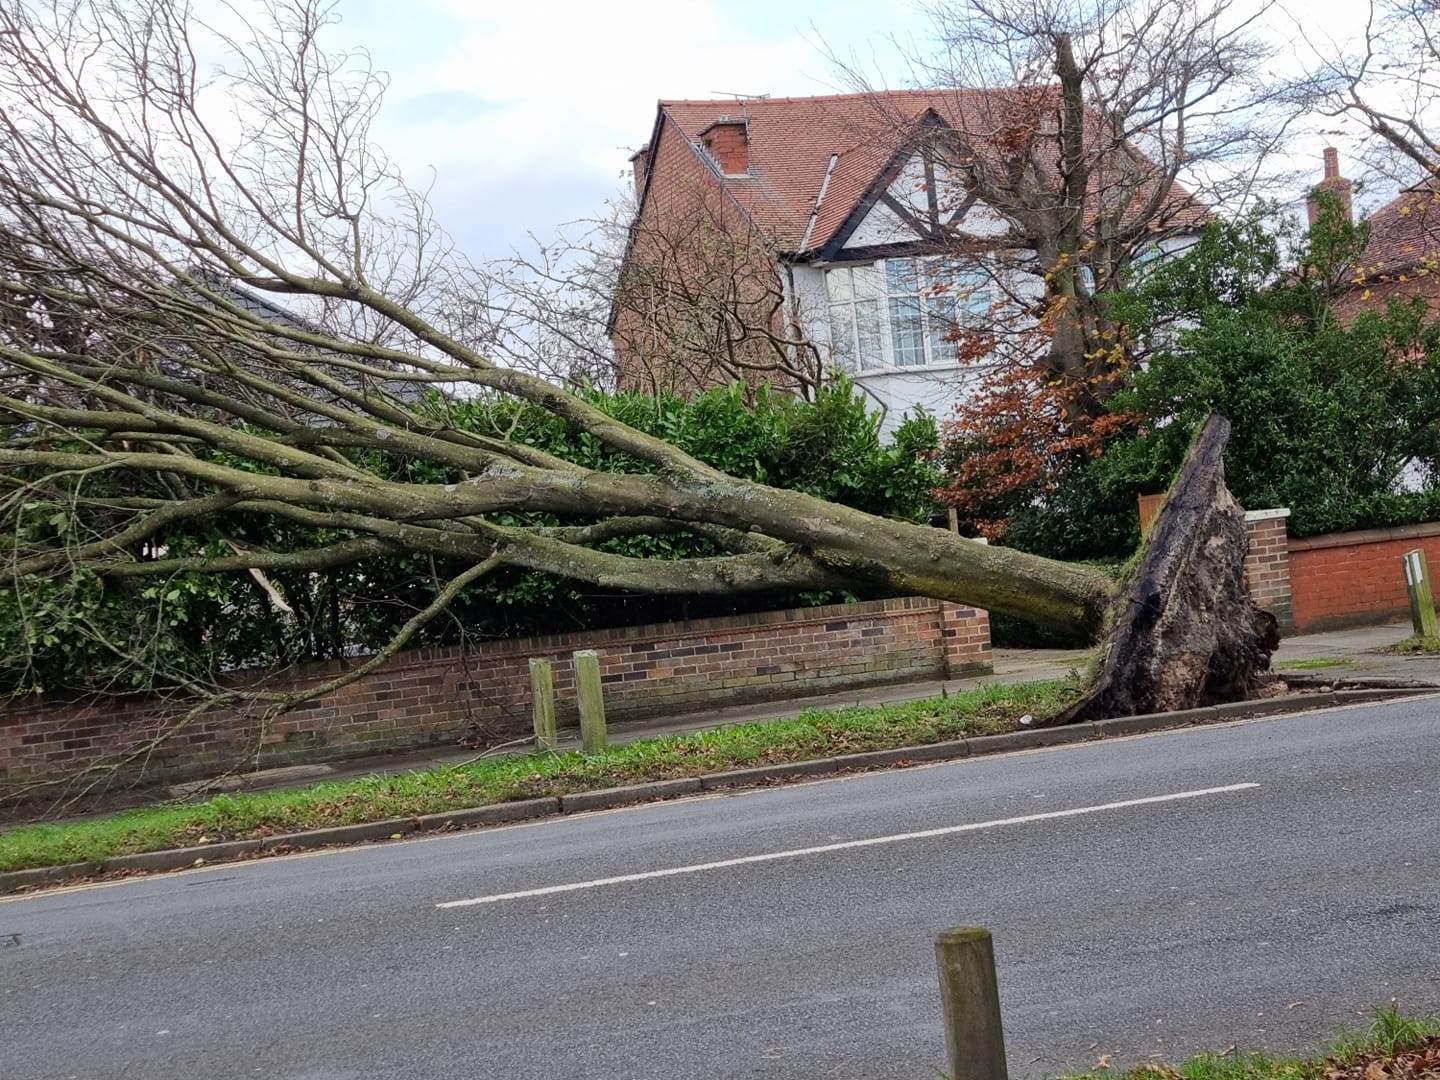 A tree was knocked over by Storm Arwen on Scarisbrick New Road in Southport. Photo by Michelle Suzanne